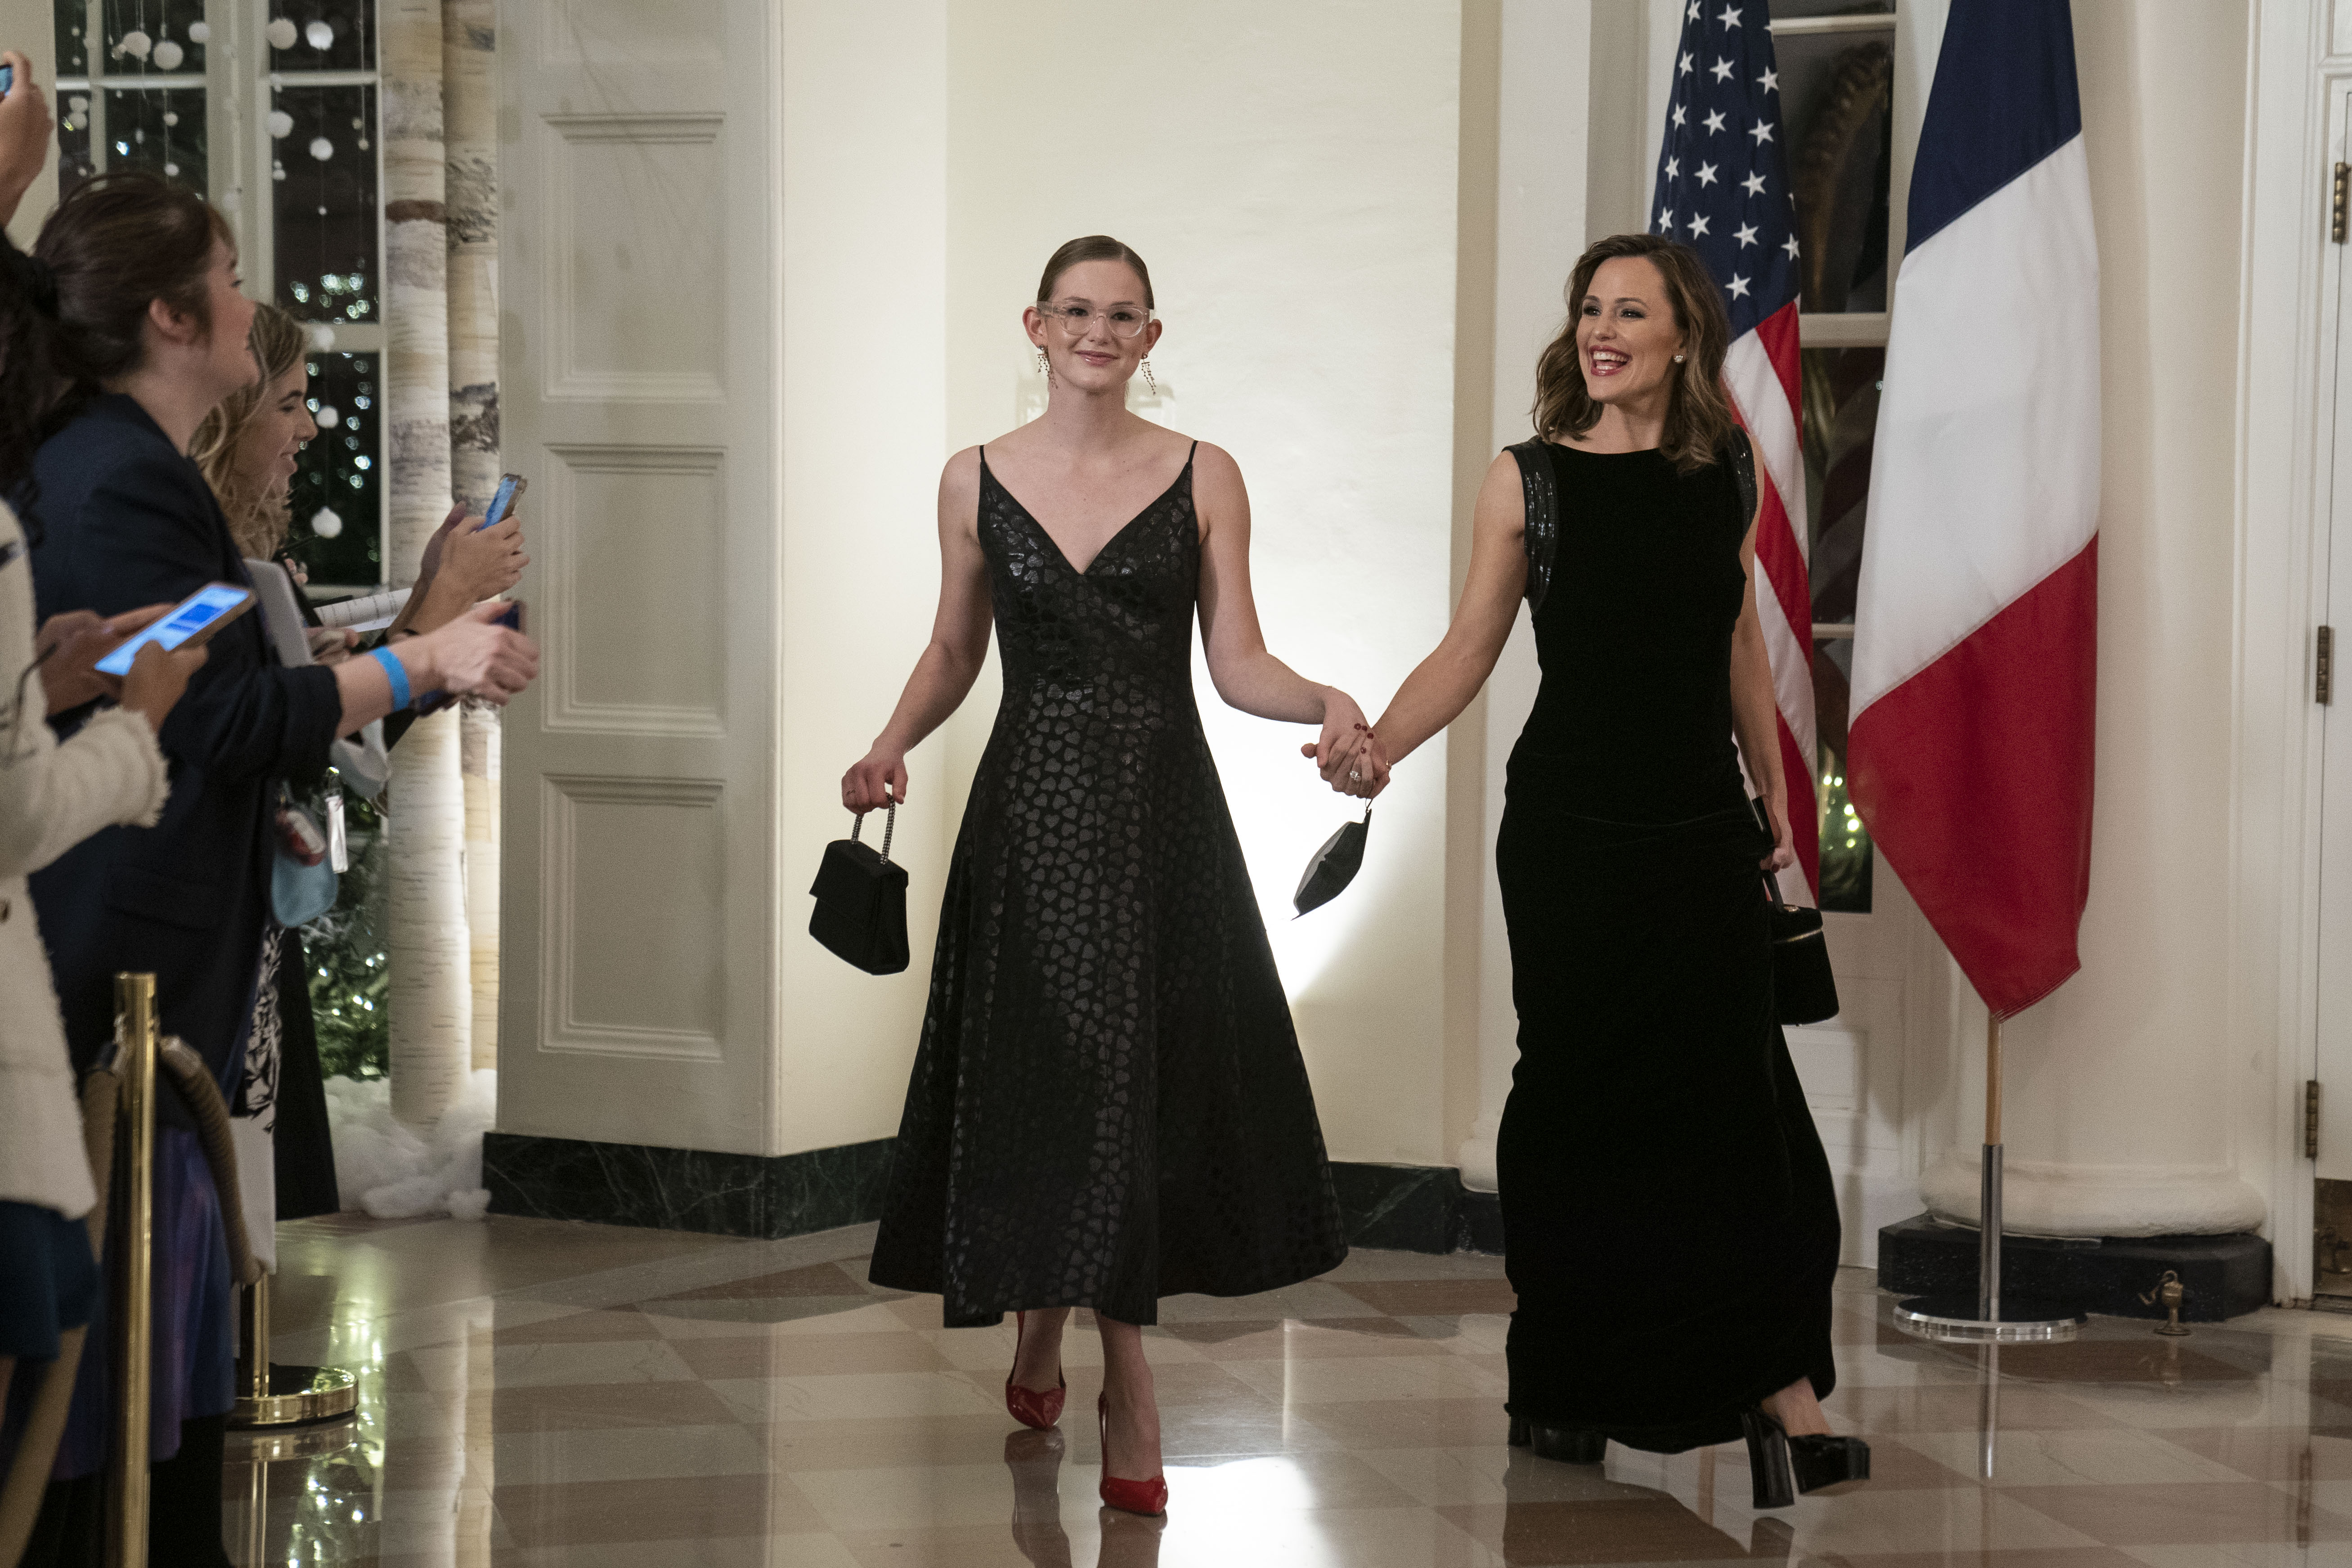 Violet Affleck and Jennifer Garner attend a state dinner in honor of French President Emmanuel Macron and Brigitte Macron hosted by U.S. President Joe Biden and First Lady Jill Biden at the White House on December 1, 2022, in Washington, DC. | Source: Getty Images